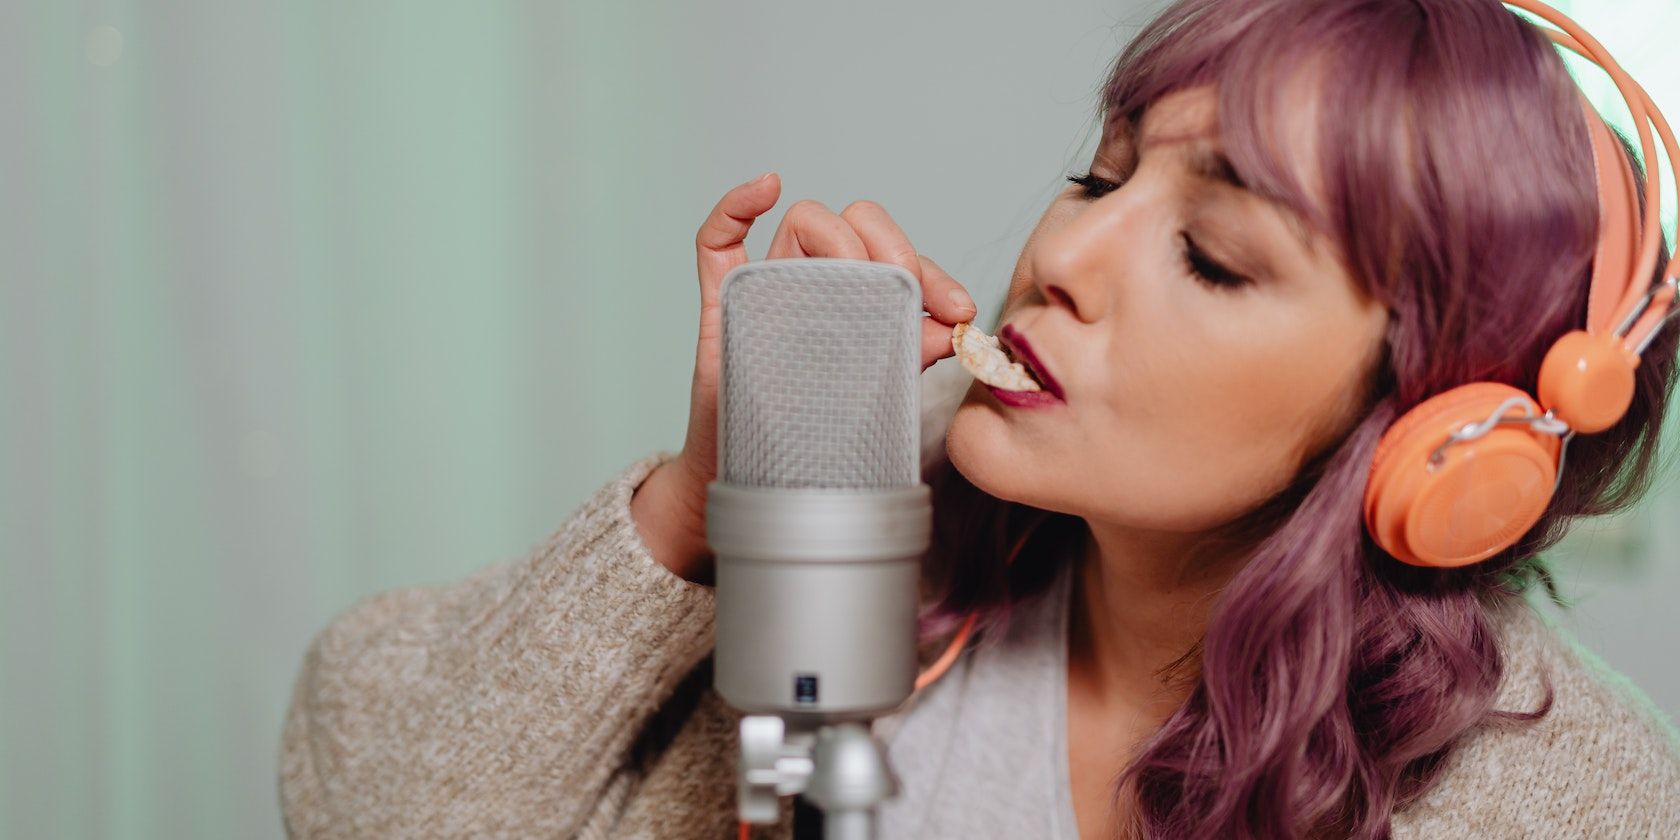 A woman in gray sweater eating a biscuit near a microphone